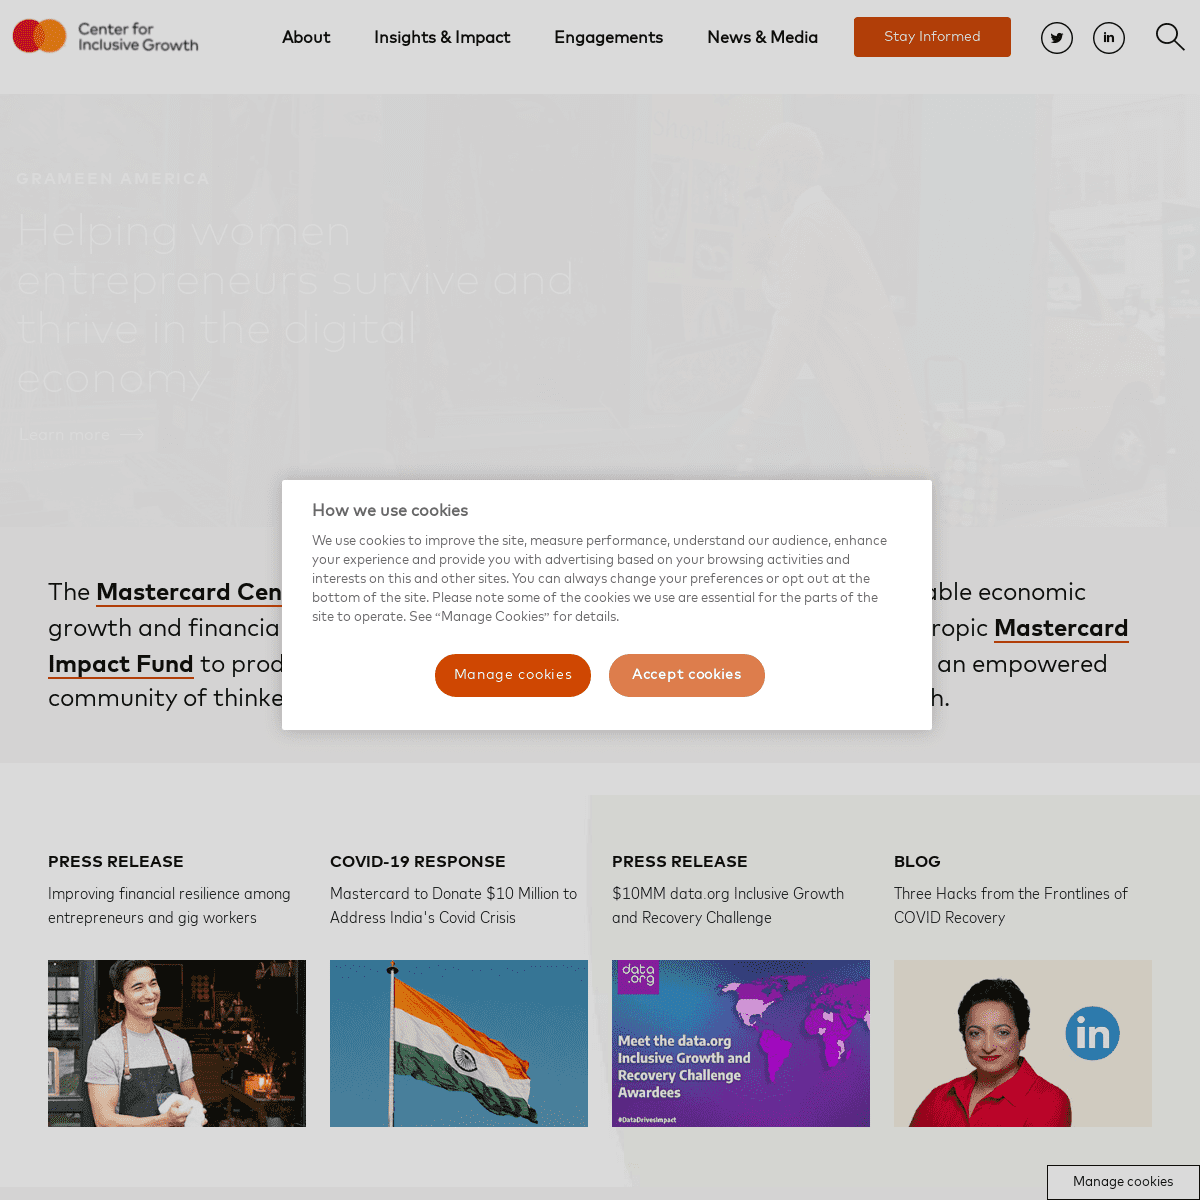 A complete backup of https://mastercardcenter.org